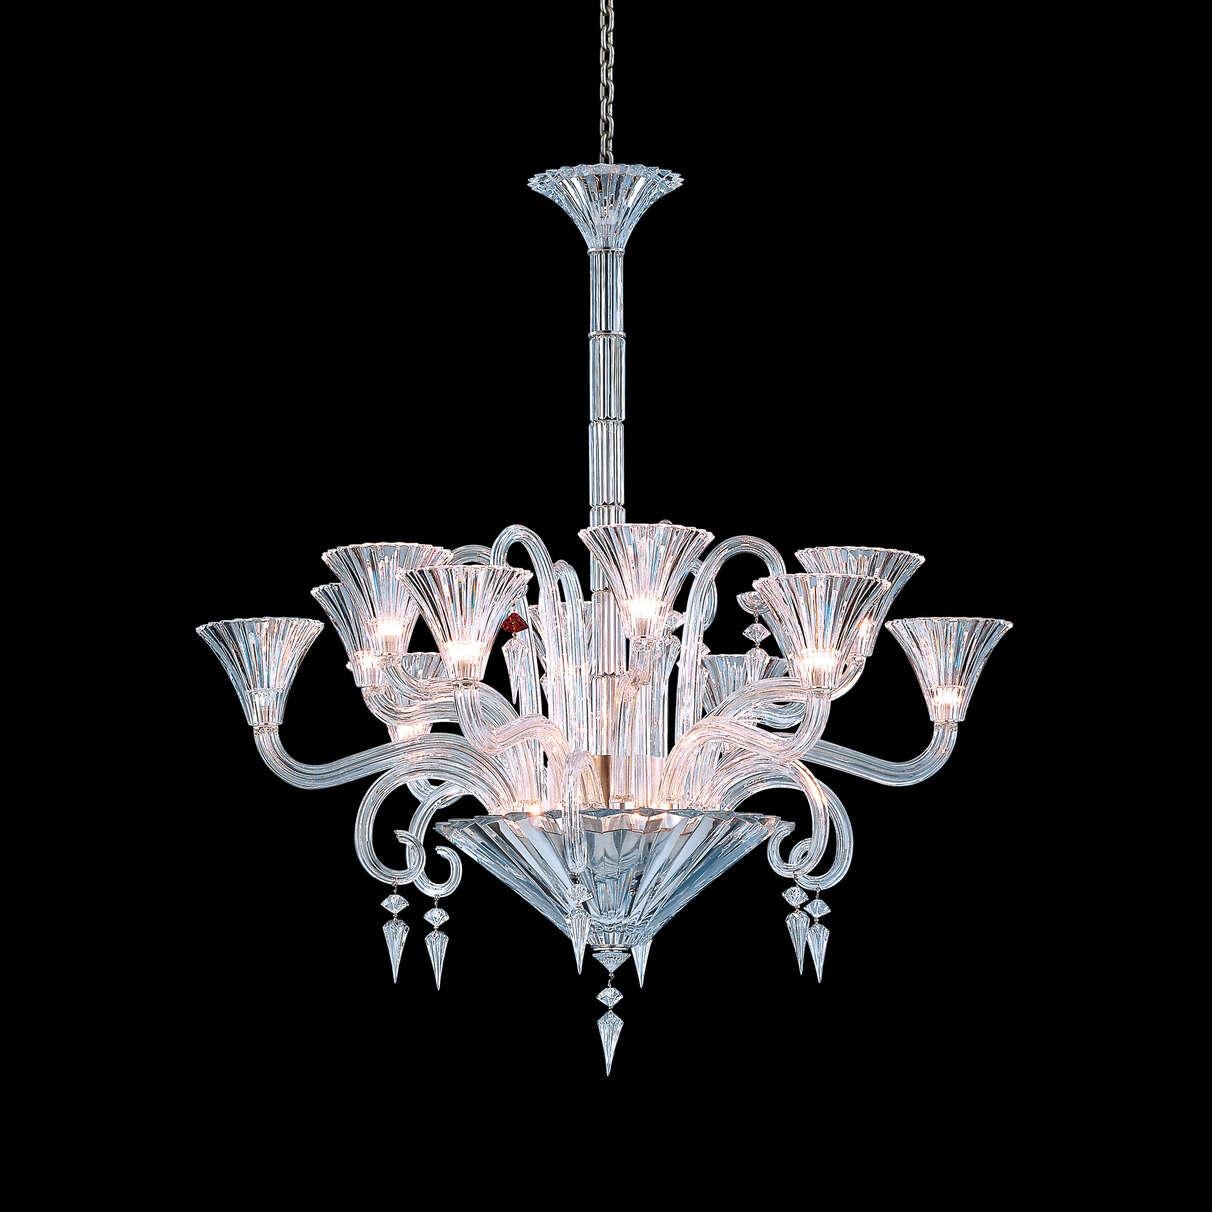 Large Exquisite French Baccarat Crystal Mille Nuits Twelve Light Chandelier For Sale 9